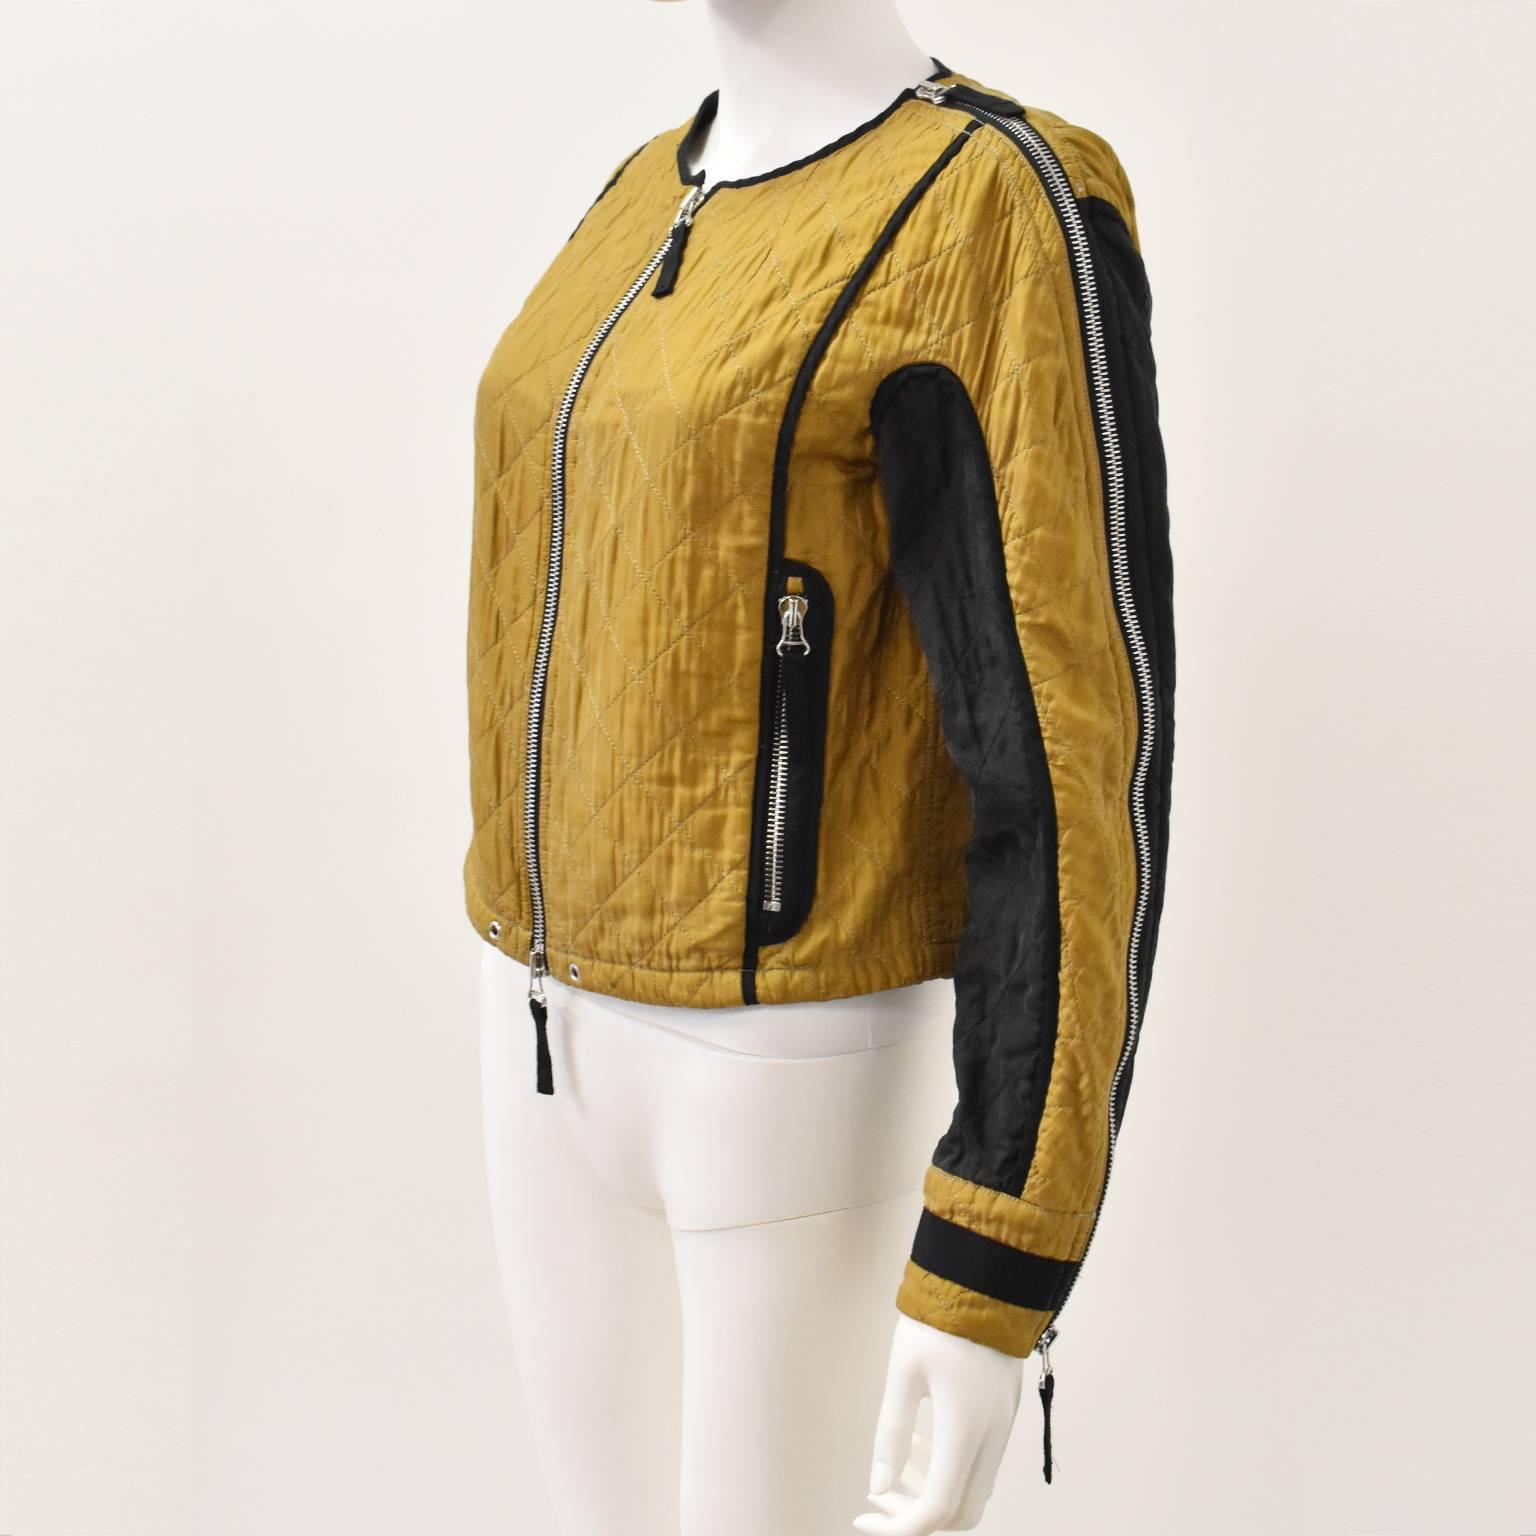 A stunning quilted jacket from Belgian brand Dries Van Noten. The jacket has a cropped shape with long sleeves, round collar and zip fastening. It is constructed from yellow quilted cotton with contrast black panels along the sleeves and black